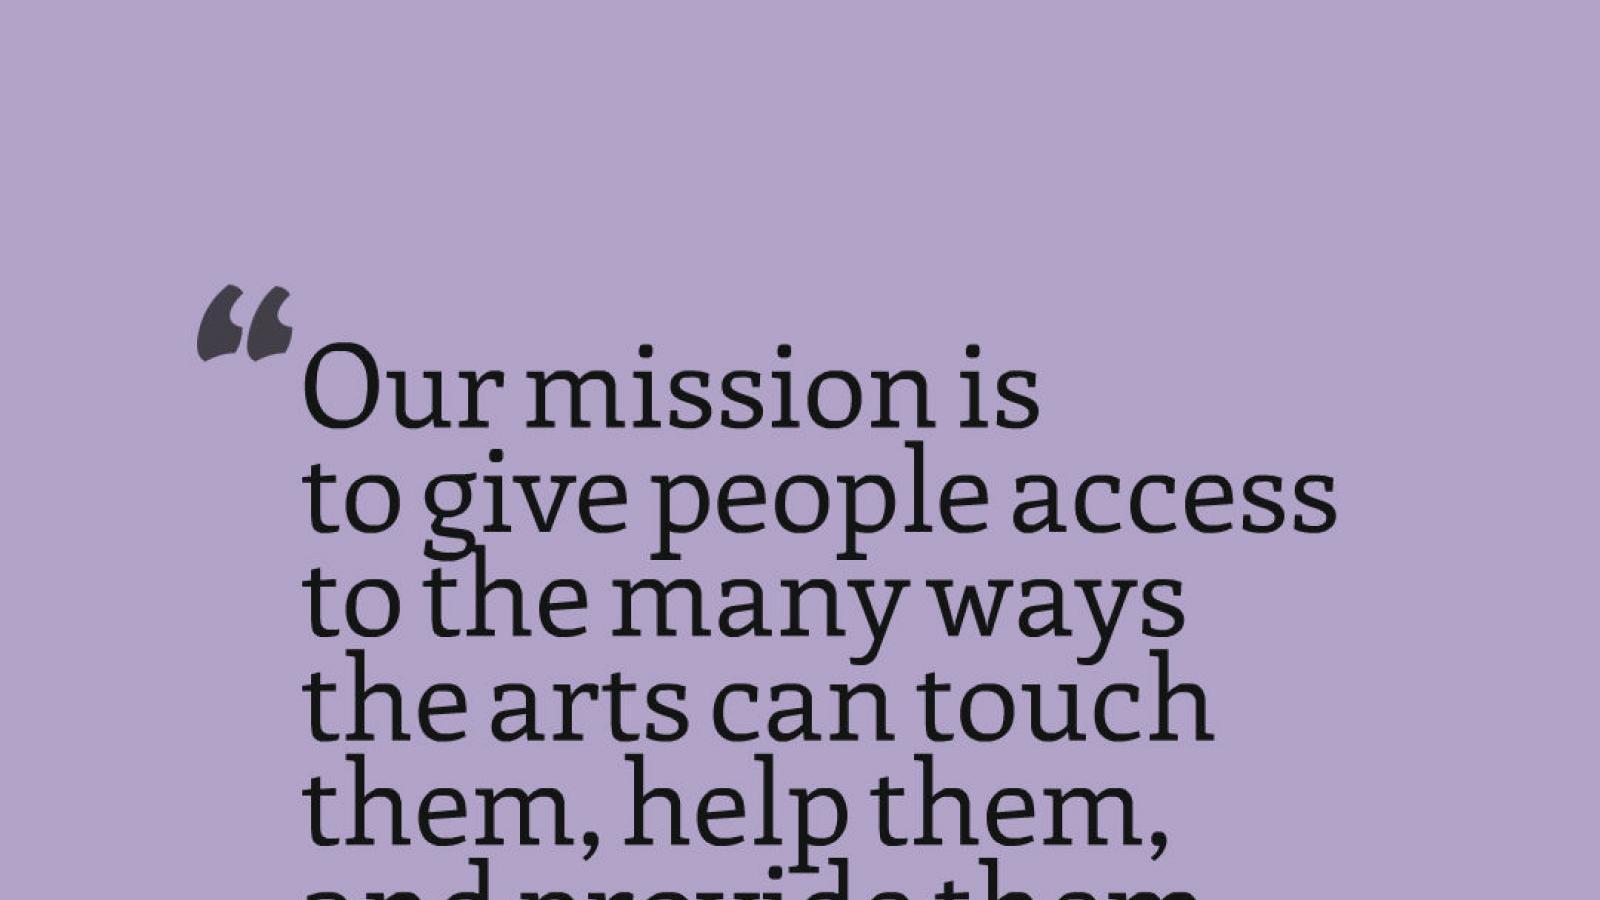 Quote about the NEA mission